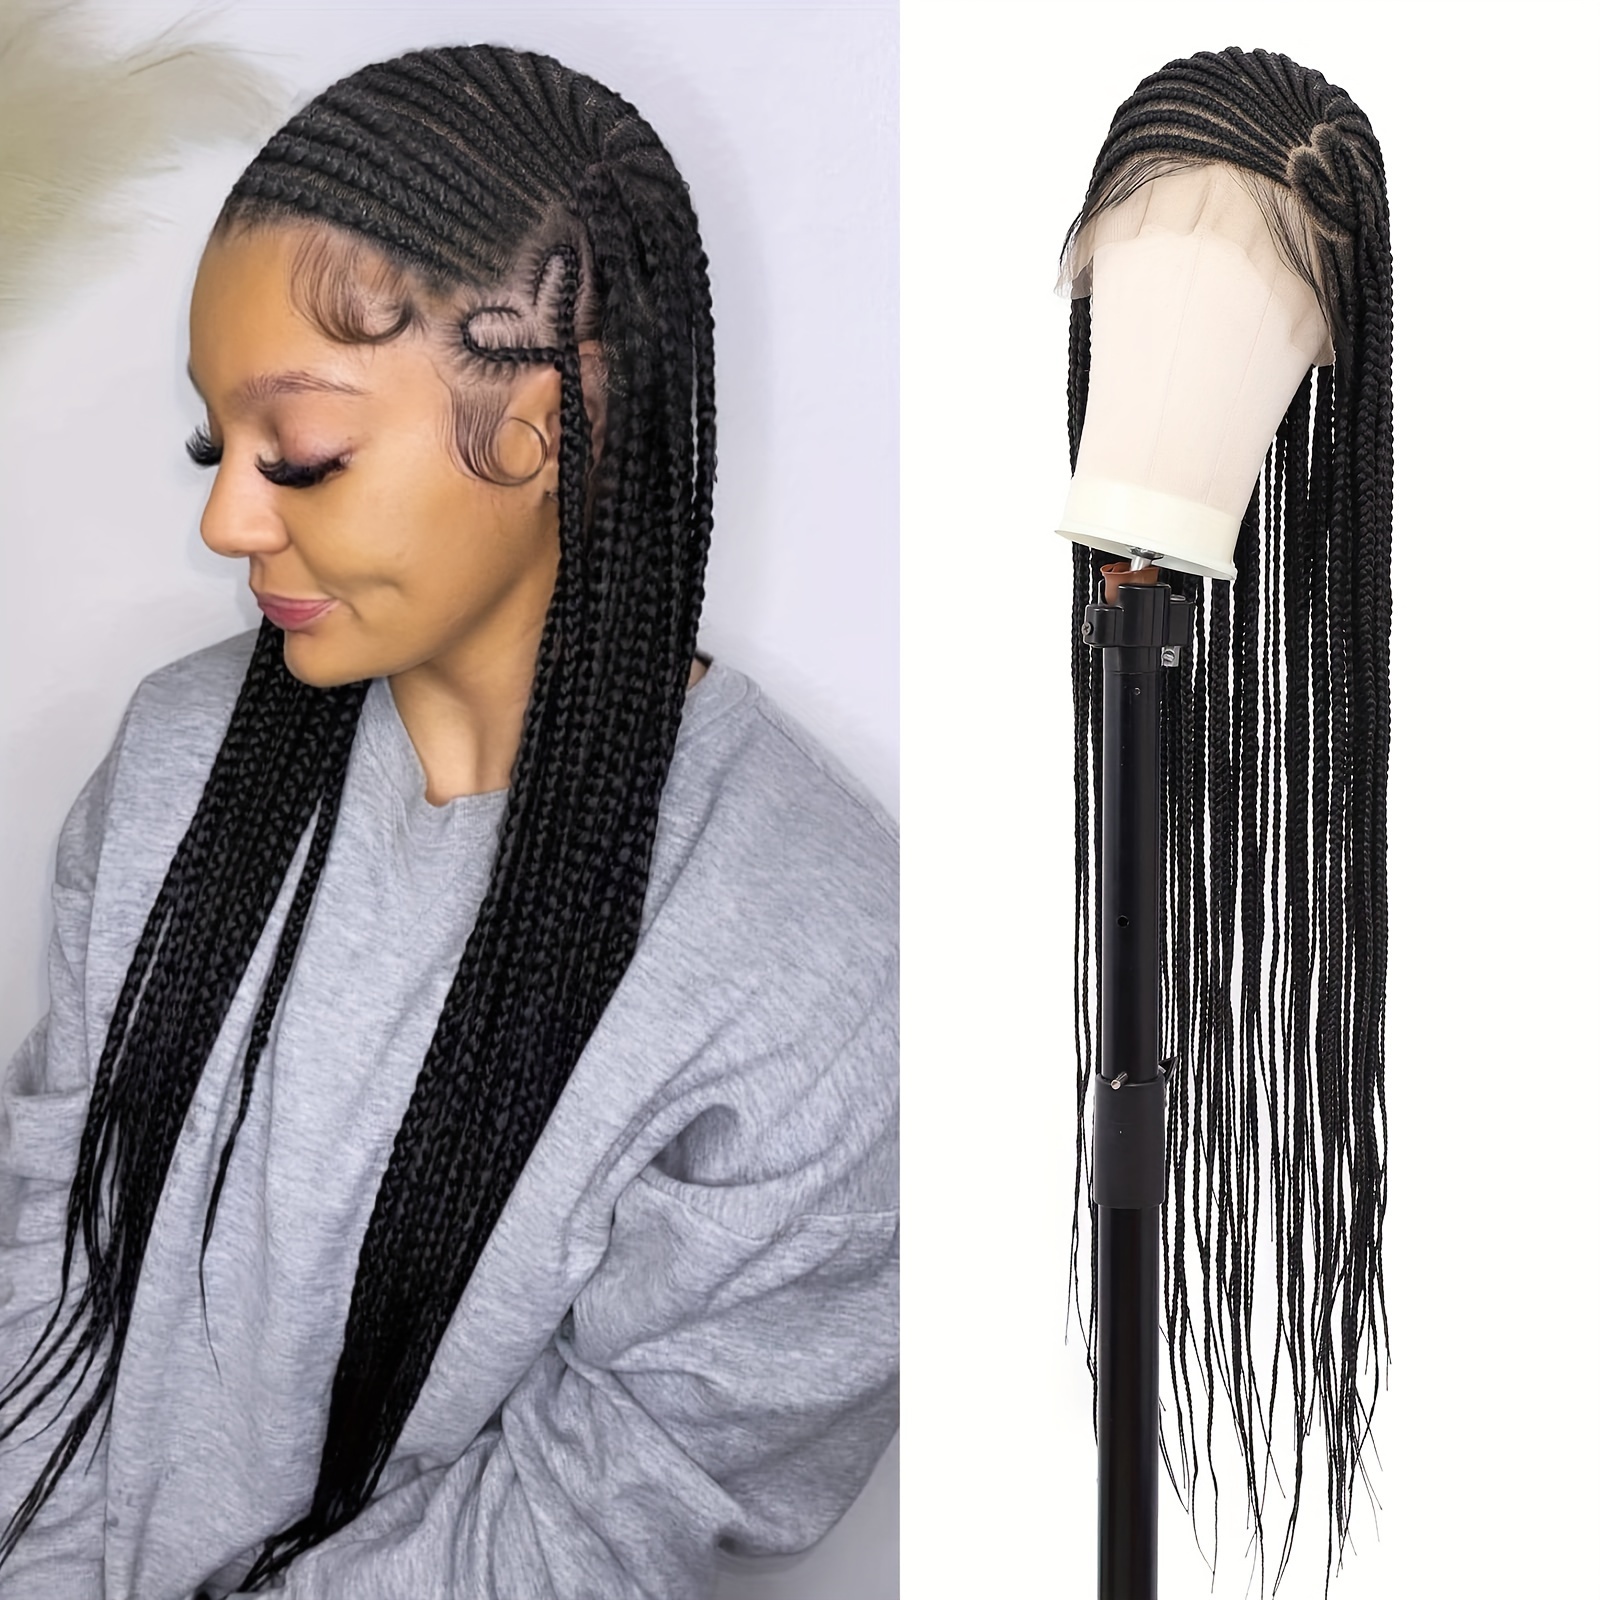 knotless braided wig | knotless braids | knotless braided wig with frontal  | knotless braided wig with full frontal (360 frontal)